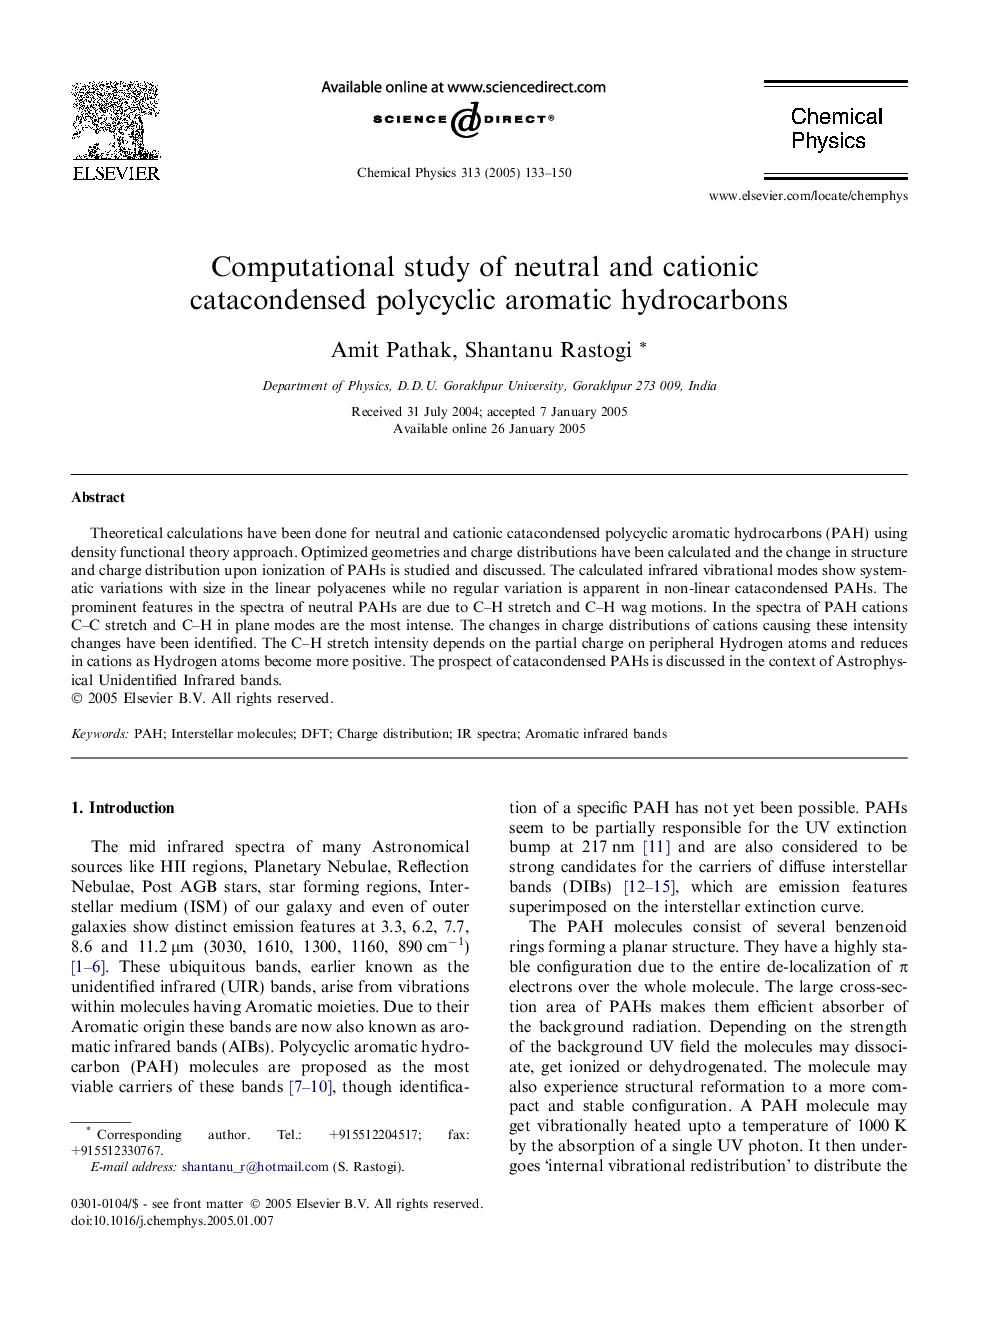 Computational study of neutral and cationic catacondensed polycyclic aromatic hydrocarbons